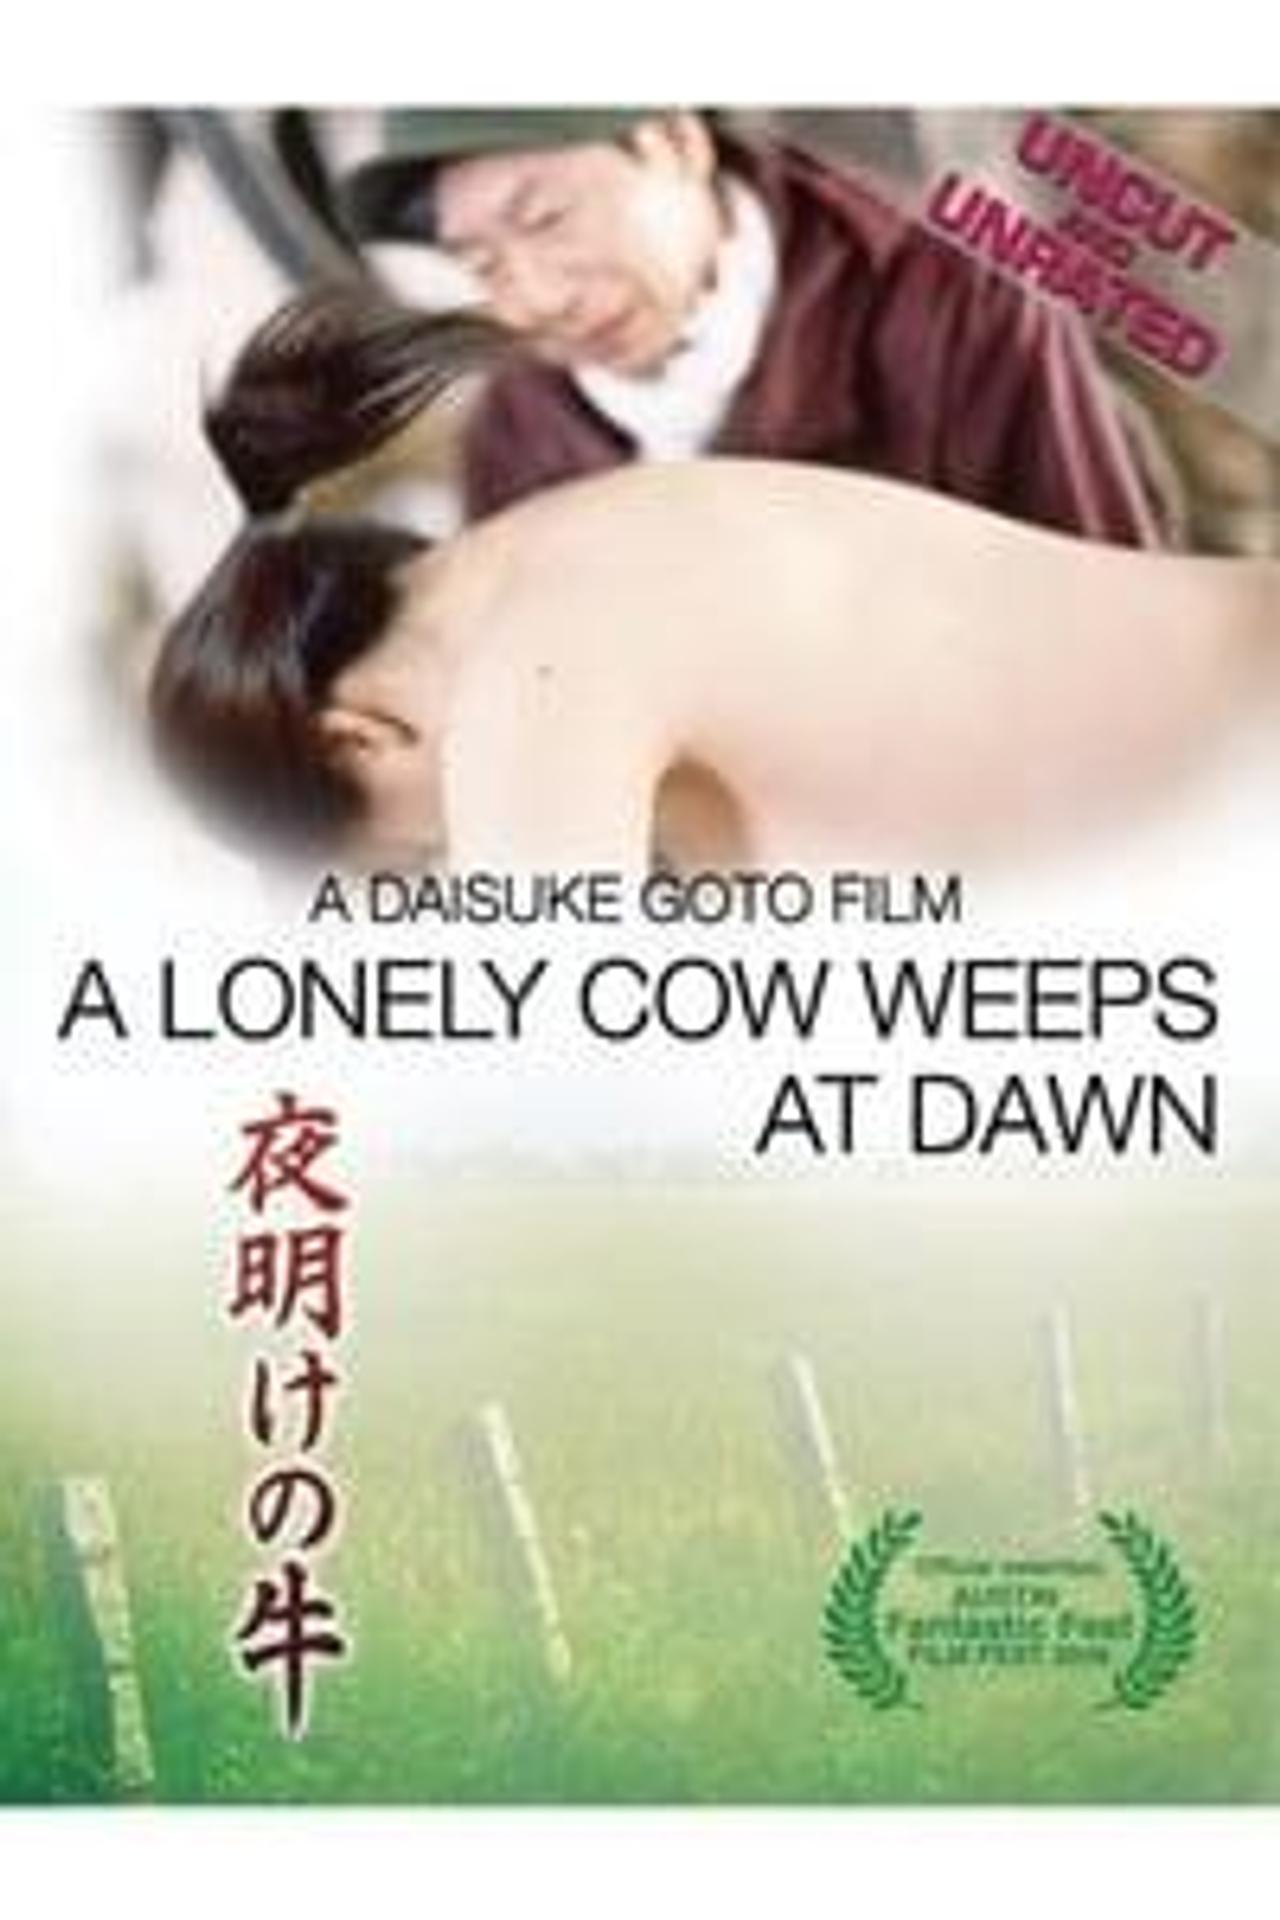 daniel michaelis recommends a lonely cow weeps pic